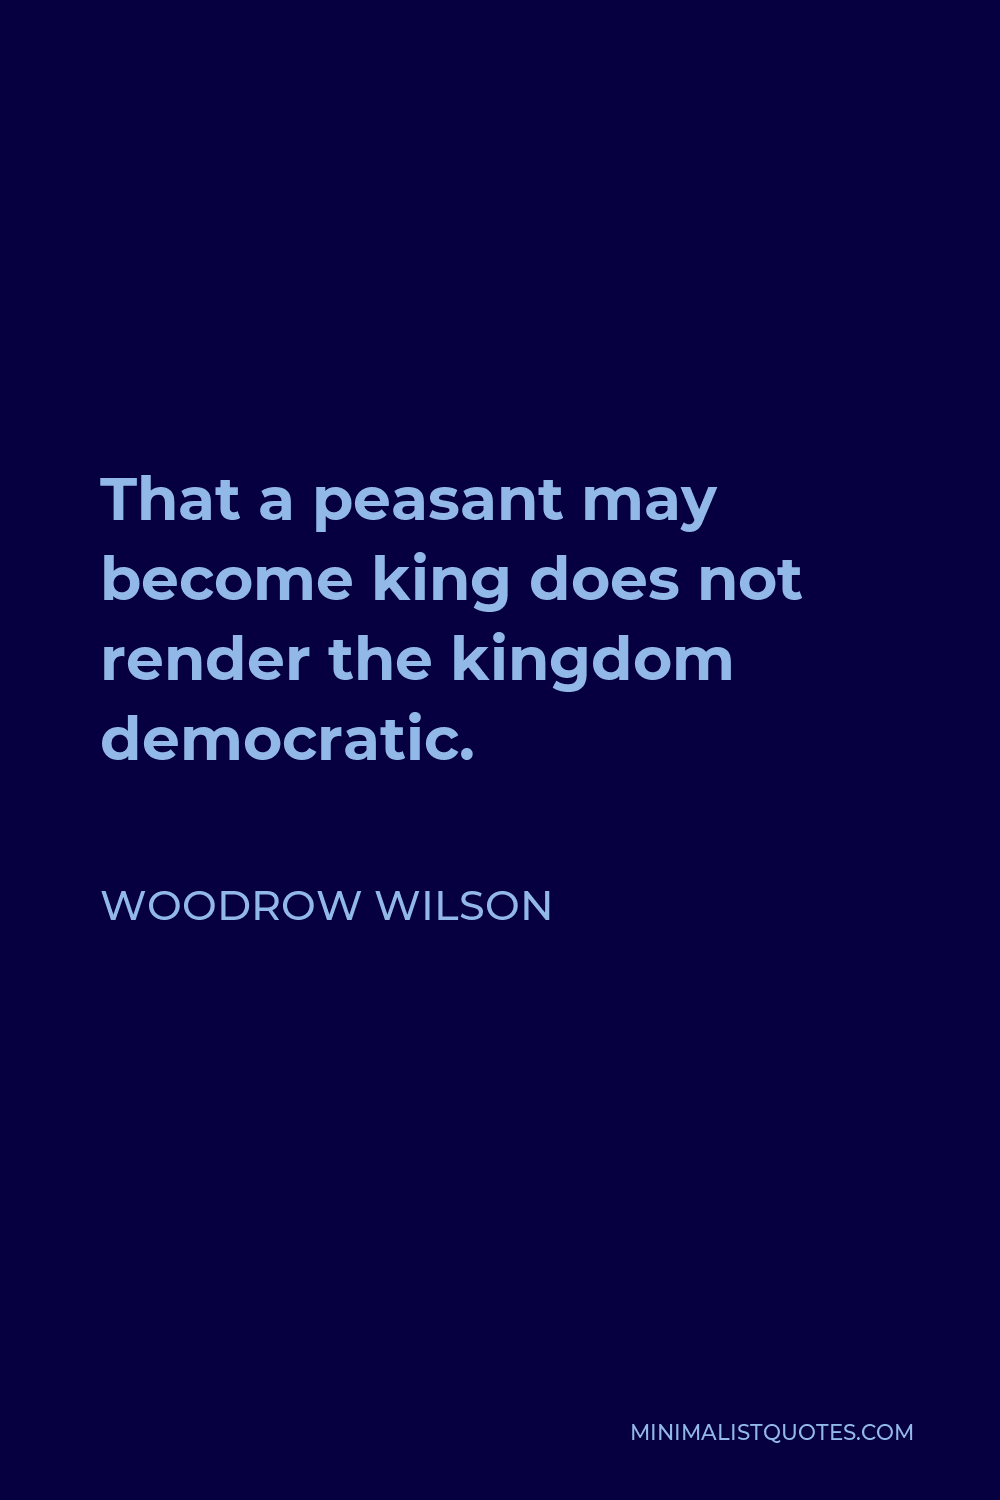 Woodrow Wilson Quote - That a peasant may become king does not render the kingdom democratic.